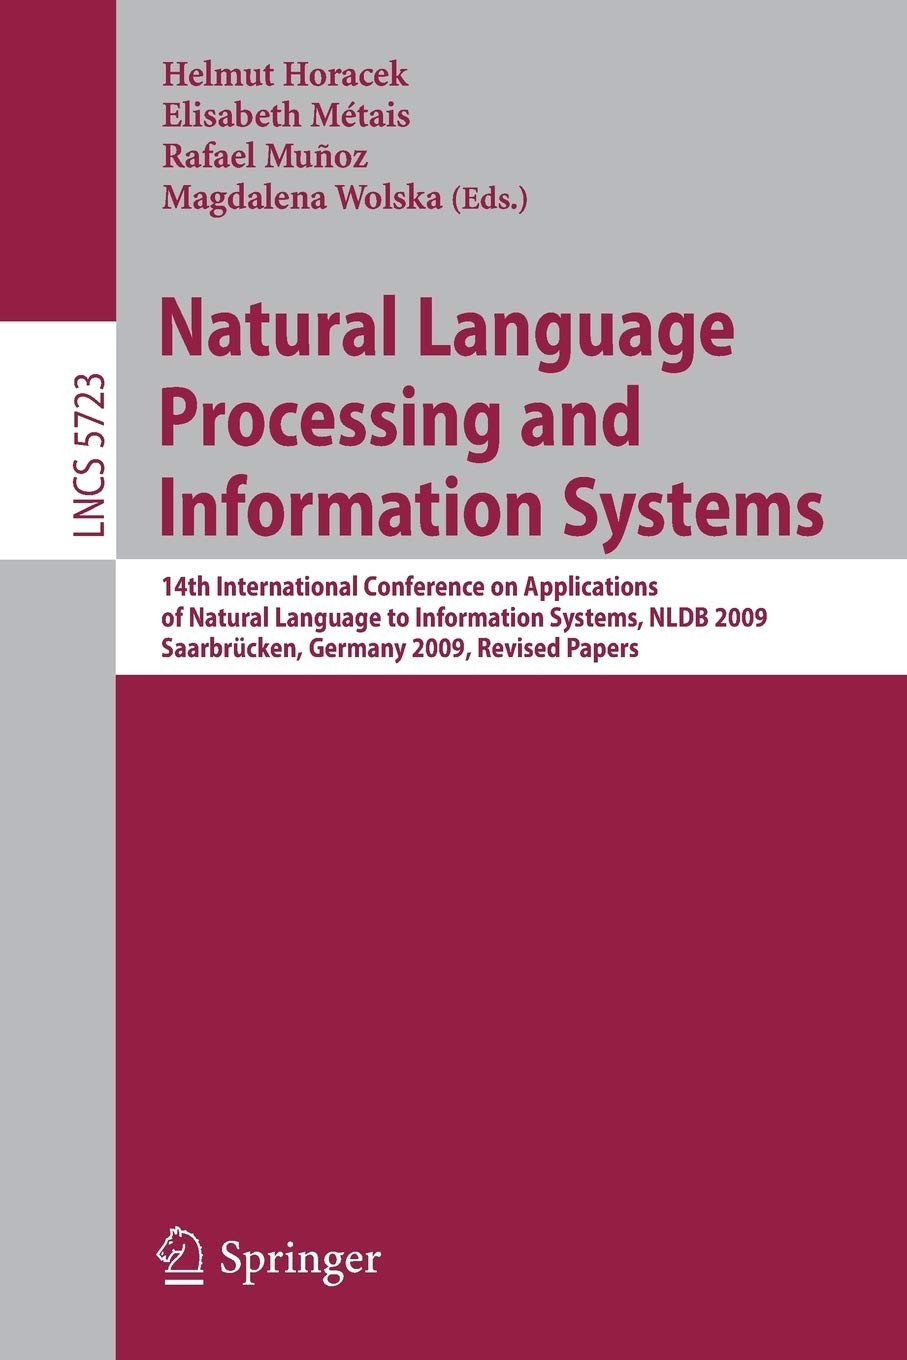 Natural Language Processing and Information Systems: 14th International Conference on Applications of Natural Language to Information Systems , NLDB 2009, Saarbrücken, Germany, June 24-26, 2009. Revised Papers